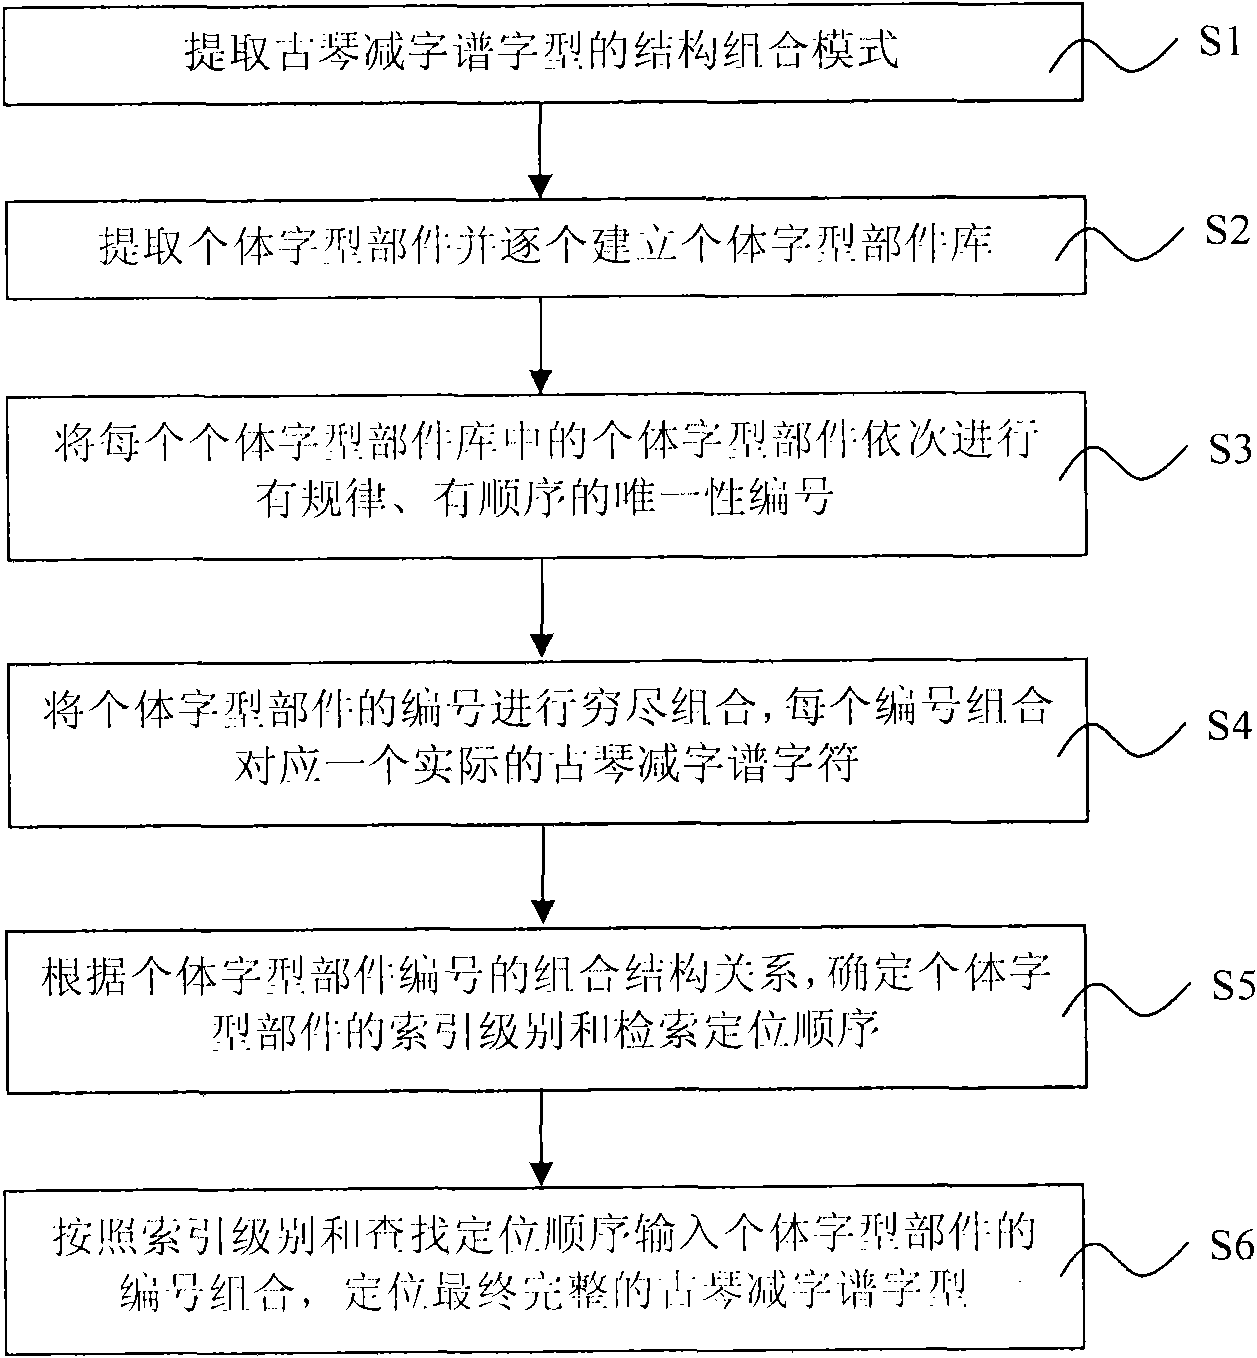 Component organization and input method of abbreviated character notation of seven-stringed plucked instrument